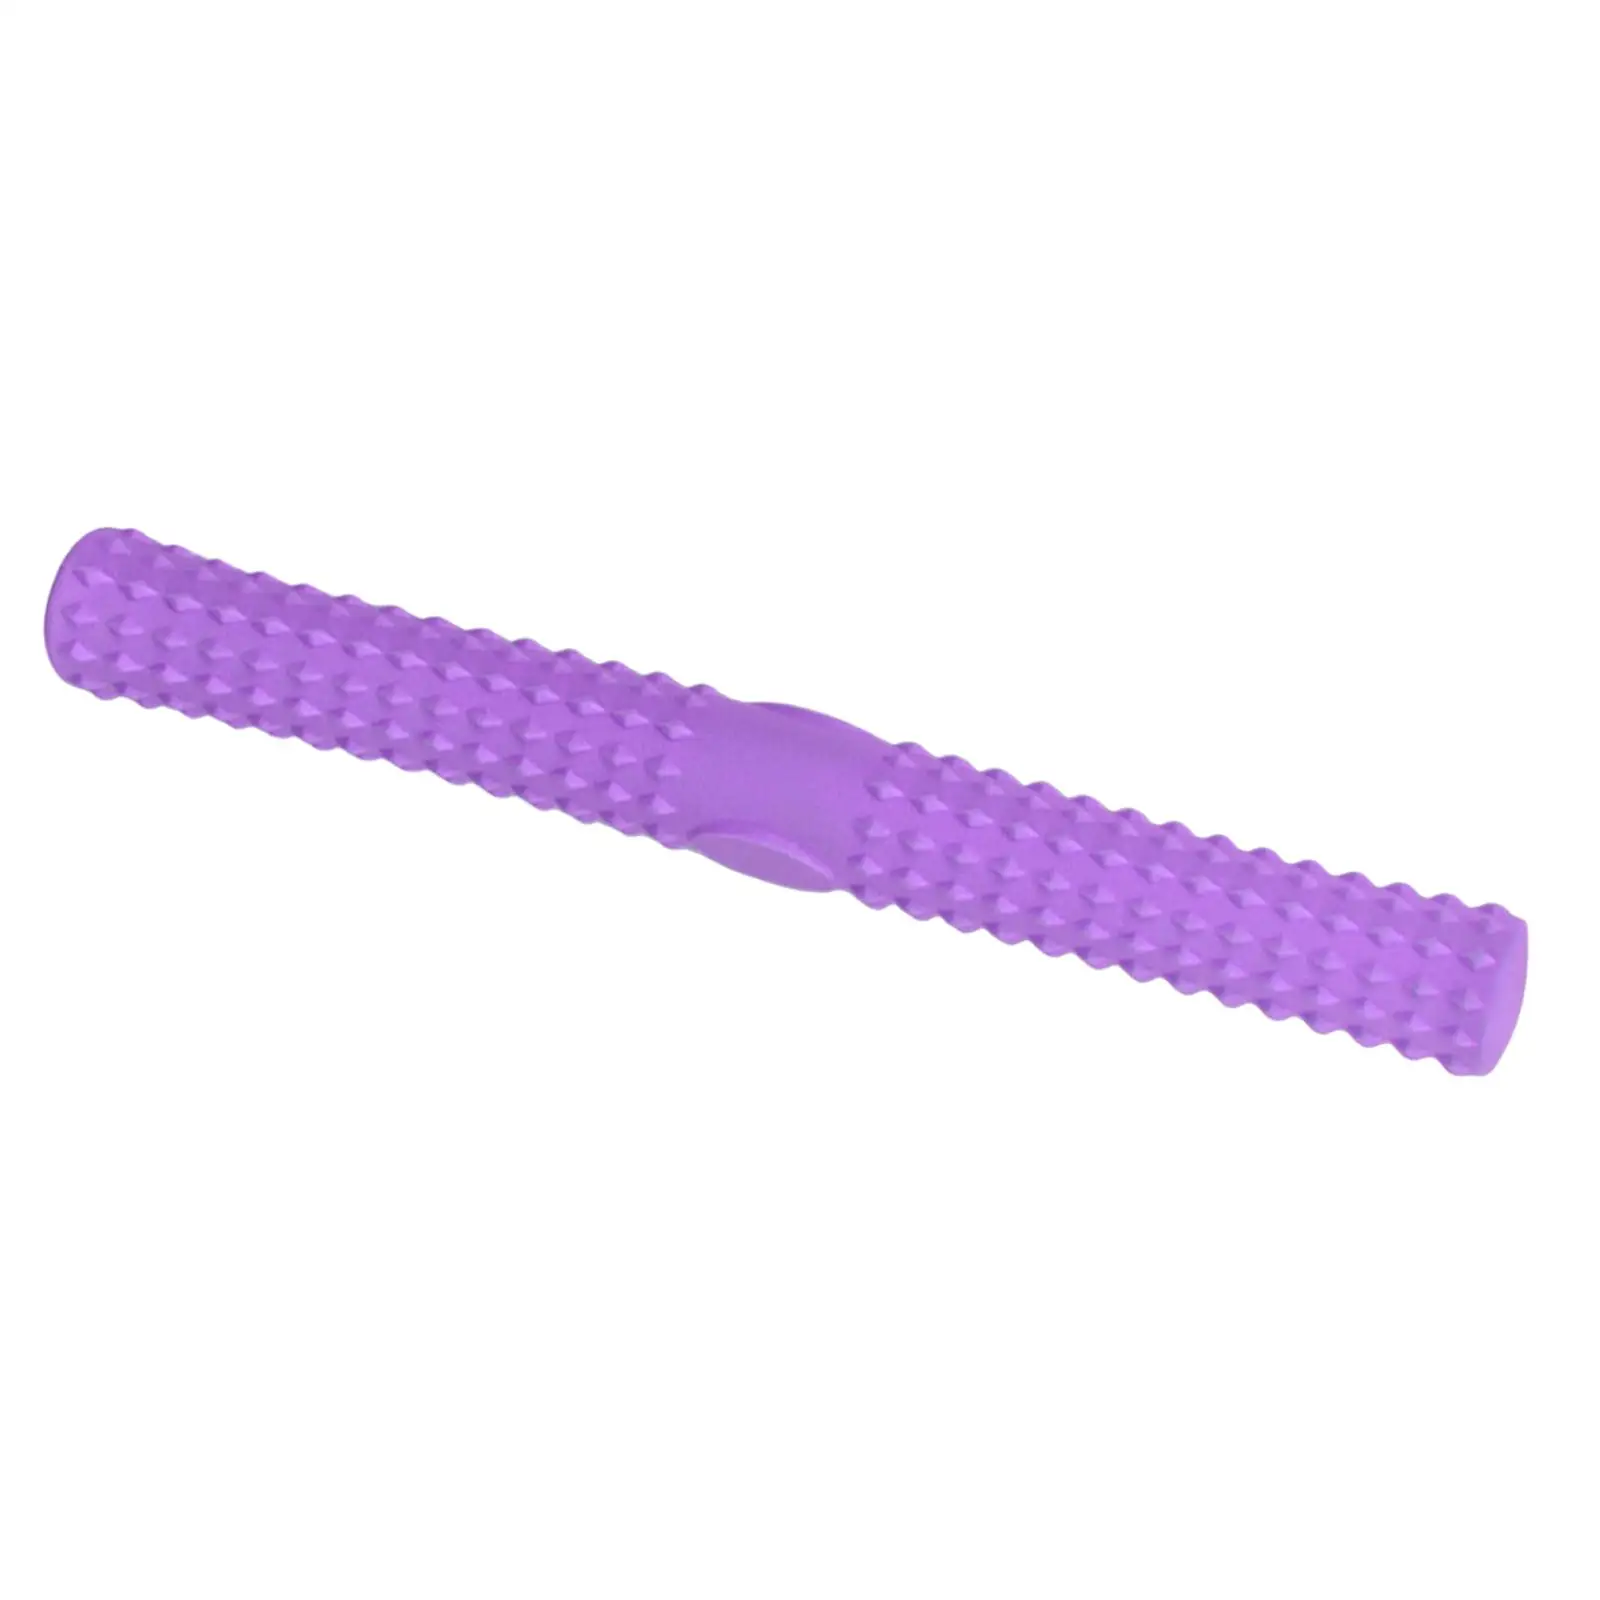 Twist Exerciser Bars Manual Travel Silicone Home Gym Resistance Training Bar